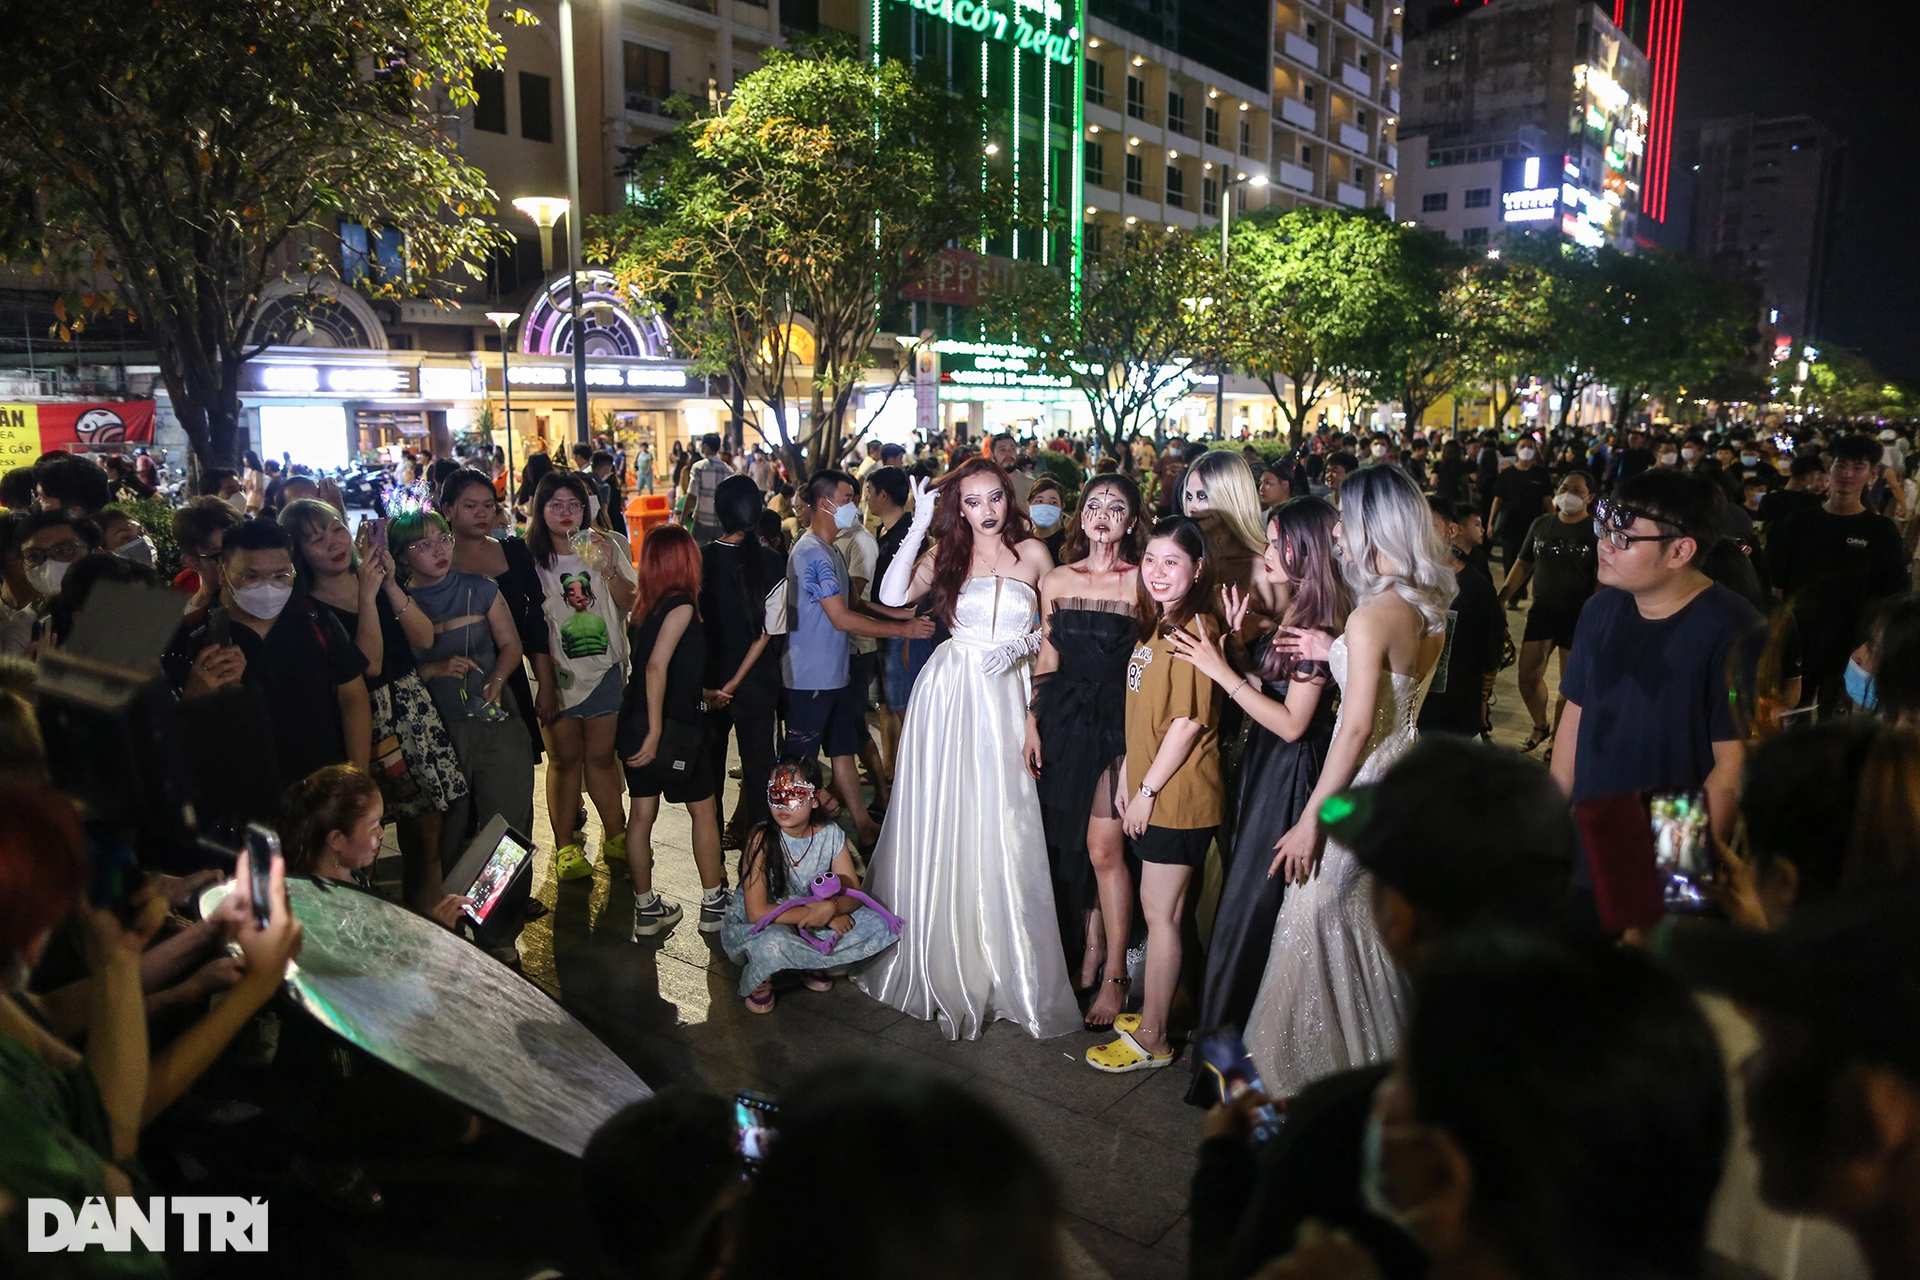 Young people in Ho Chi Minh City dressed up in strange costumes to play Halloween early on Nguyen Hue Street - 3